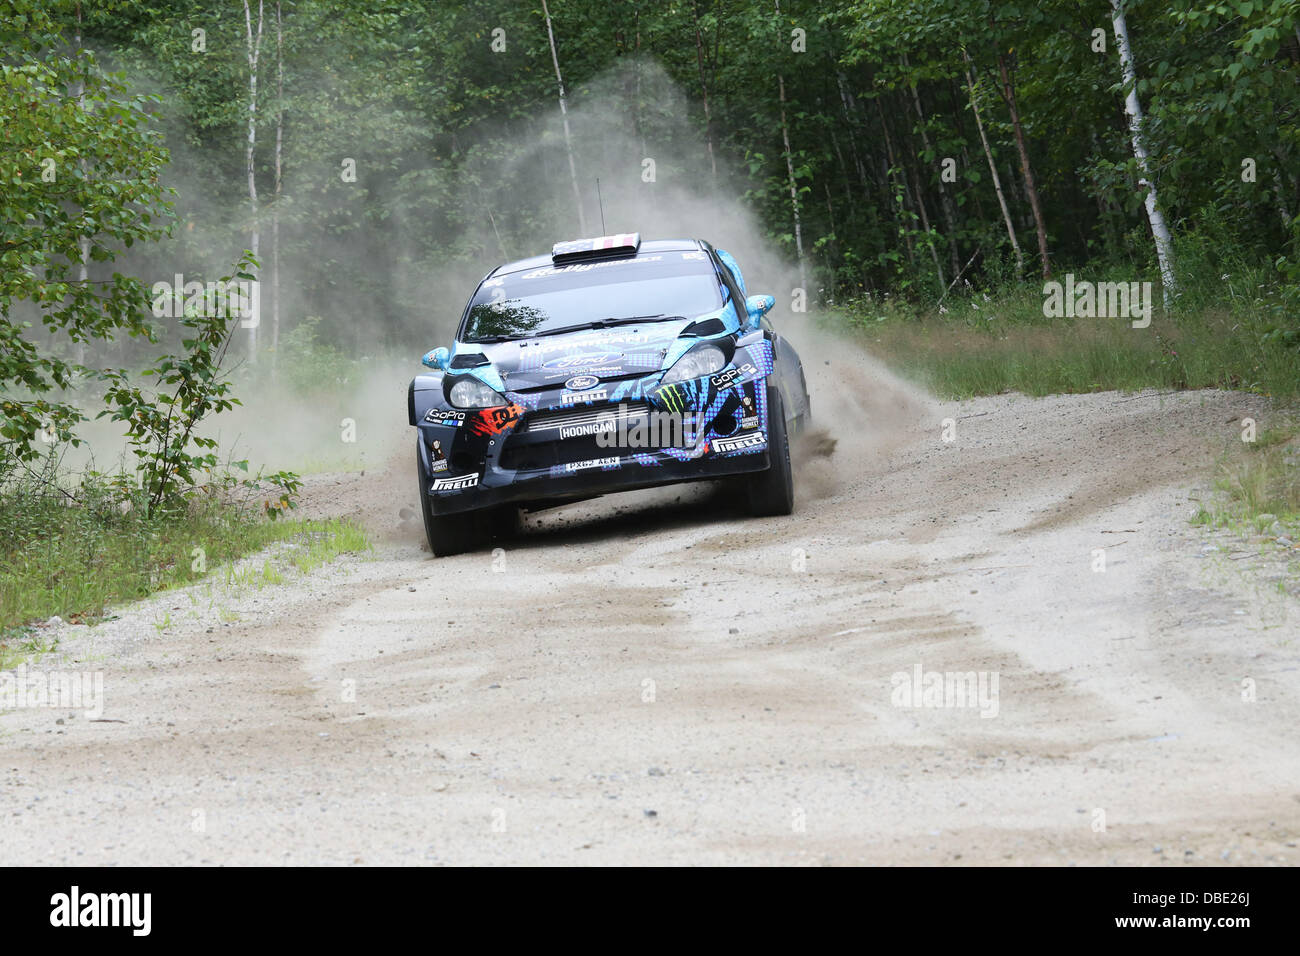 Newry, Maine, USA. 26th July, 2013. Hoonigan Racing's Ken Block and Alex Gelsomino hit the second stage in the New England Forest Rally. Hoonigan Racing's Ken Block and Alex Gelsomino won their first New England Forest Rally (NEFR) on Saturday by 6.5 seconds faster than Subaru Rally Team USA's David Higgins and Craig Drew in the Rally American National Championship event at Newry, Maine. © Nicolaus Czarnecki/ZUMAPRESS.com/Alamy Live News Stock Photo